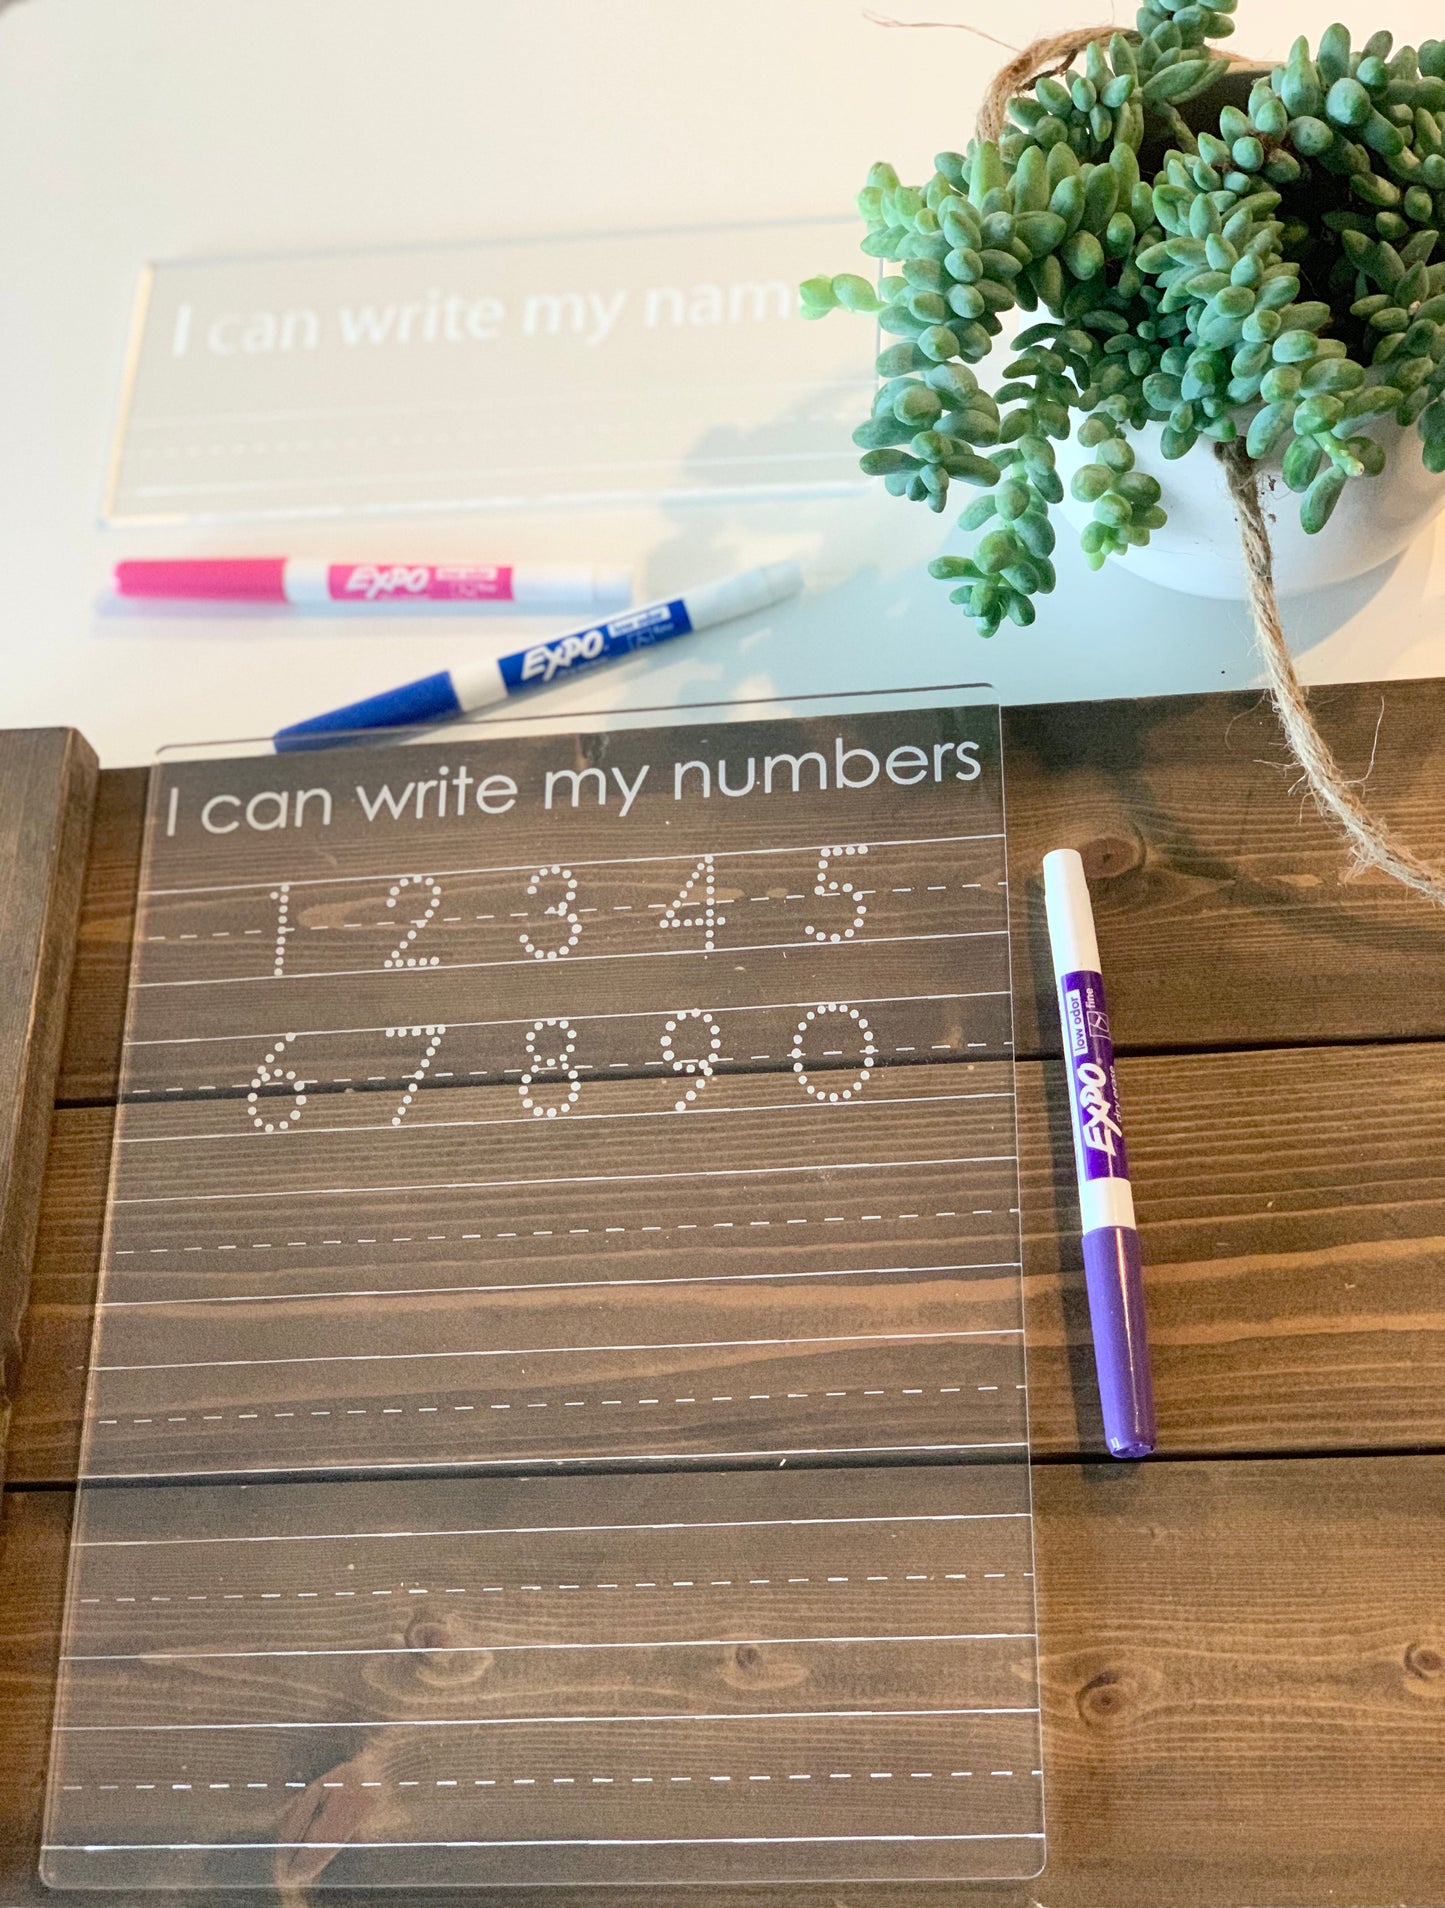 I can write my numbers Acrylic Dry Erase Board